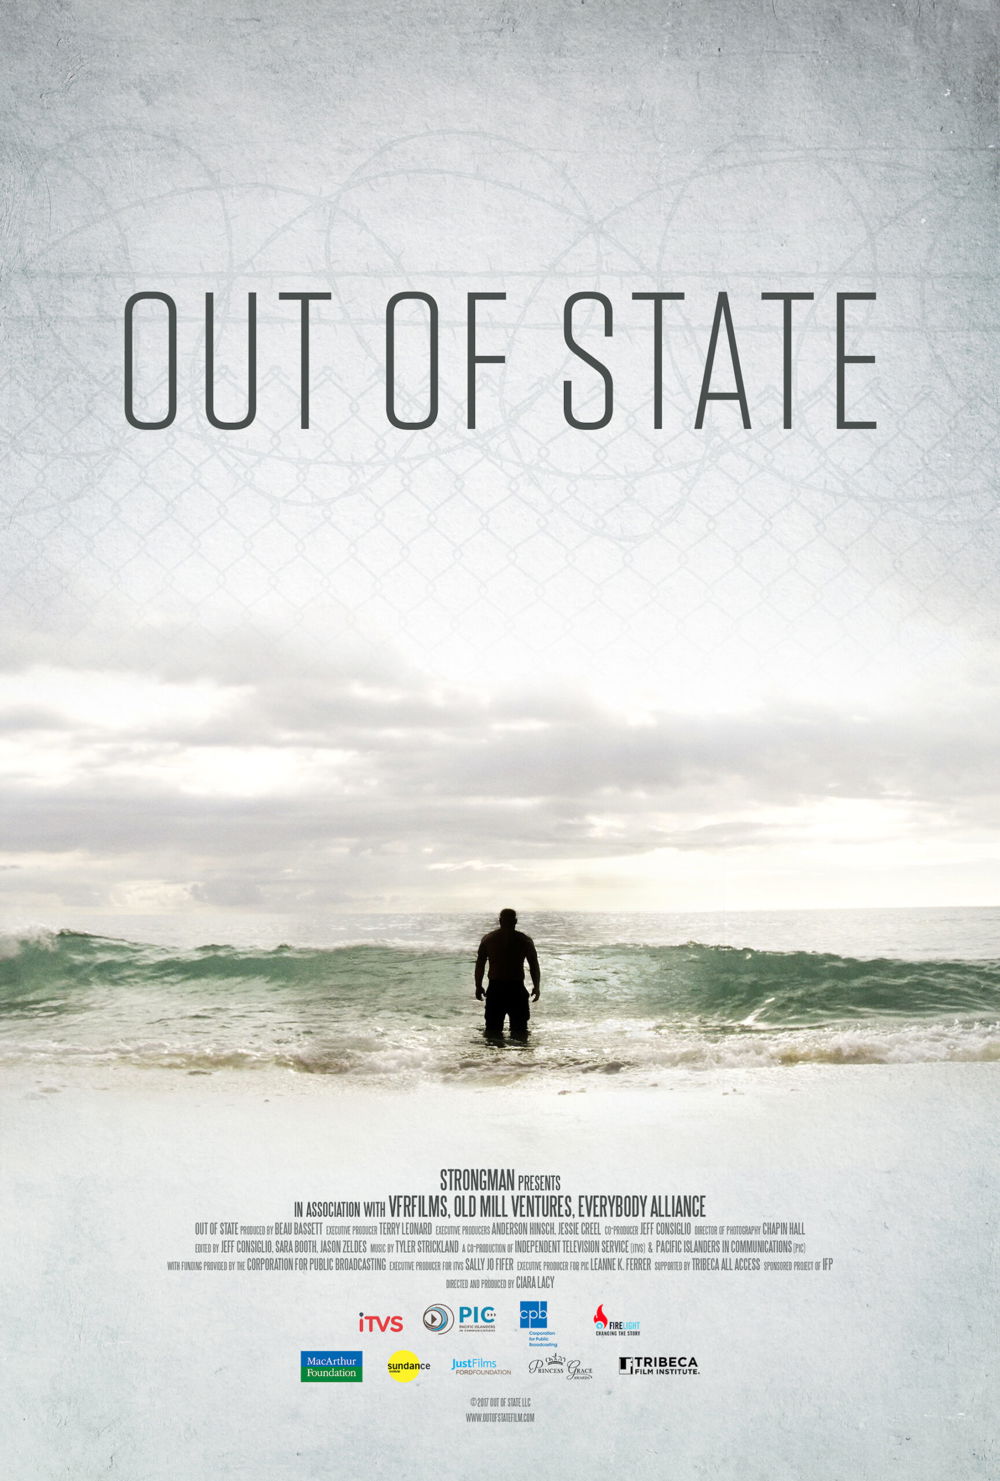 A movie poster featuring a figure, seen at a distance, standing in the ocean with water coming up to their knees. The figure is backlit; their dark silhouette contrasts with the ghostly gray sky and pale-green waves.